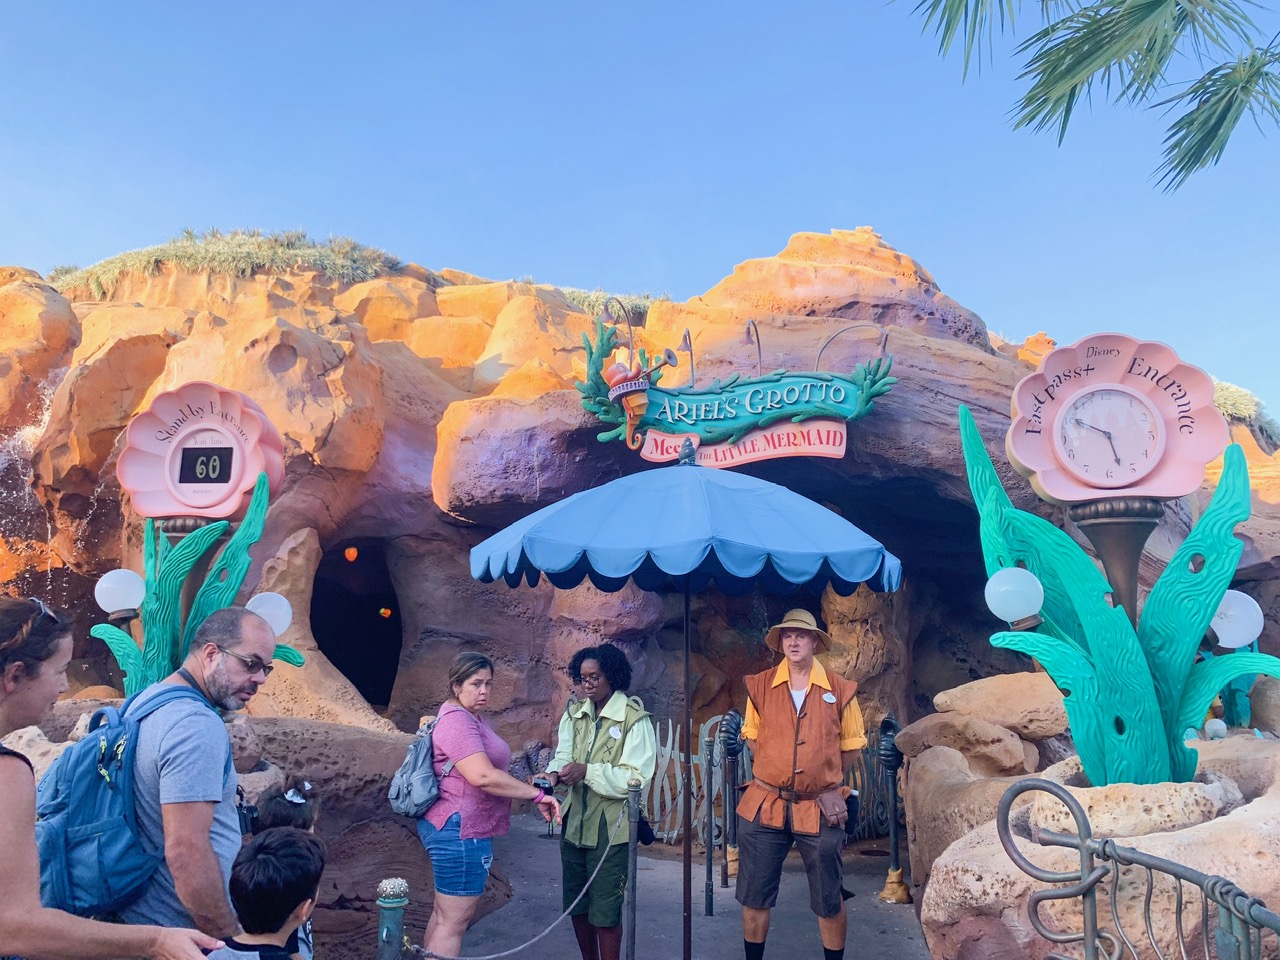 Ariel's Grotto Meet and Greet at Magic Kingdom is a great Fastpass option